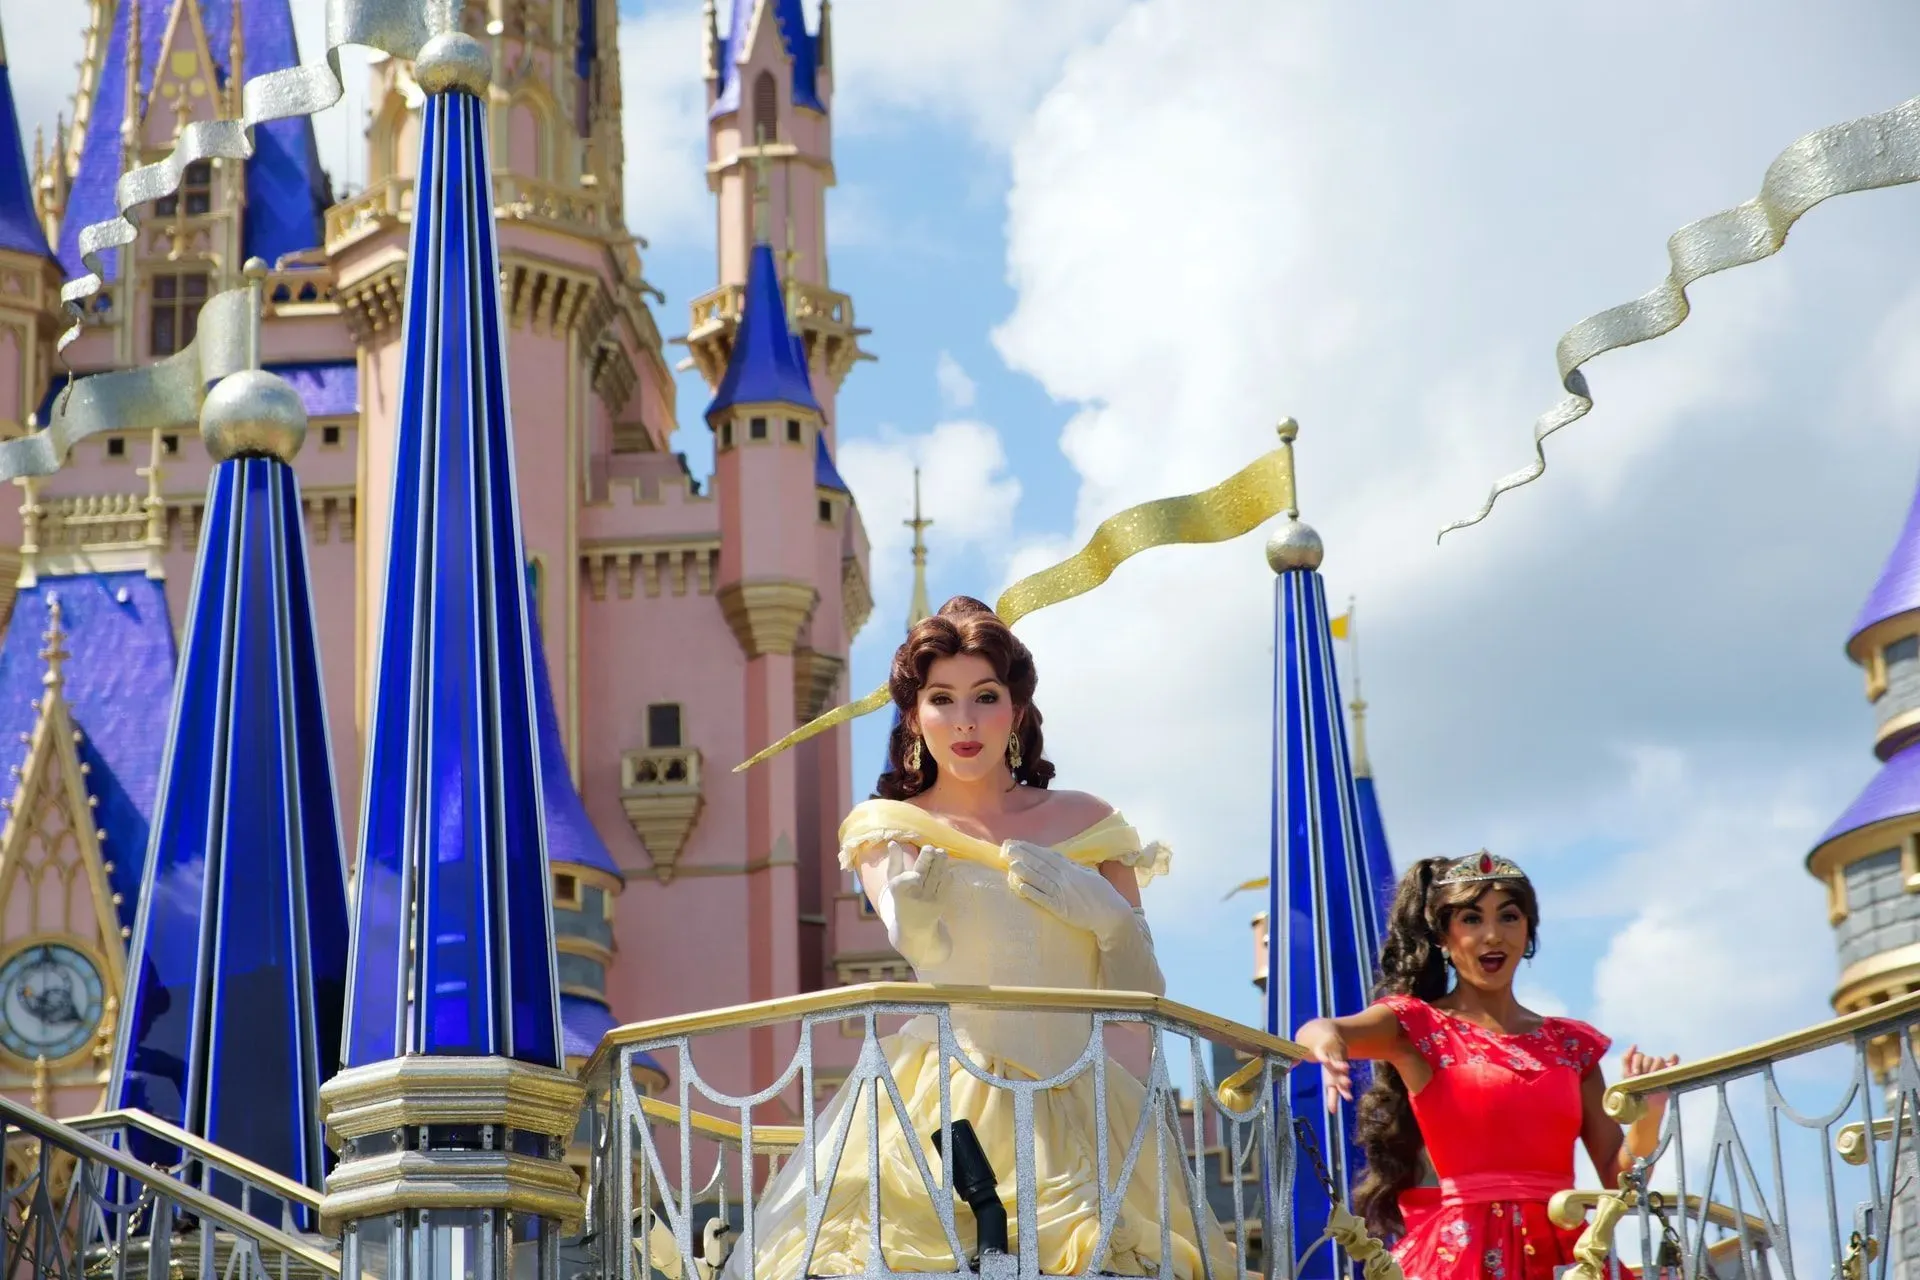 Disney princesses are loved by millions, and the youngest Disney princess is no different.